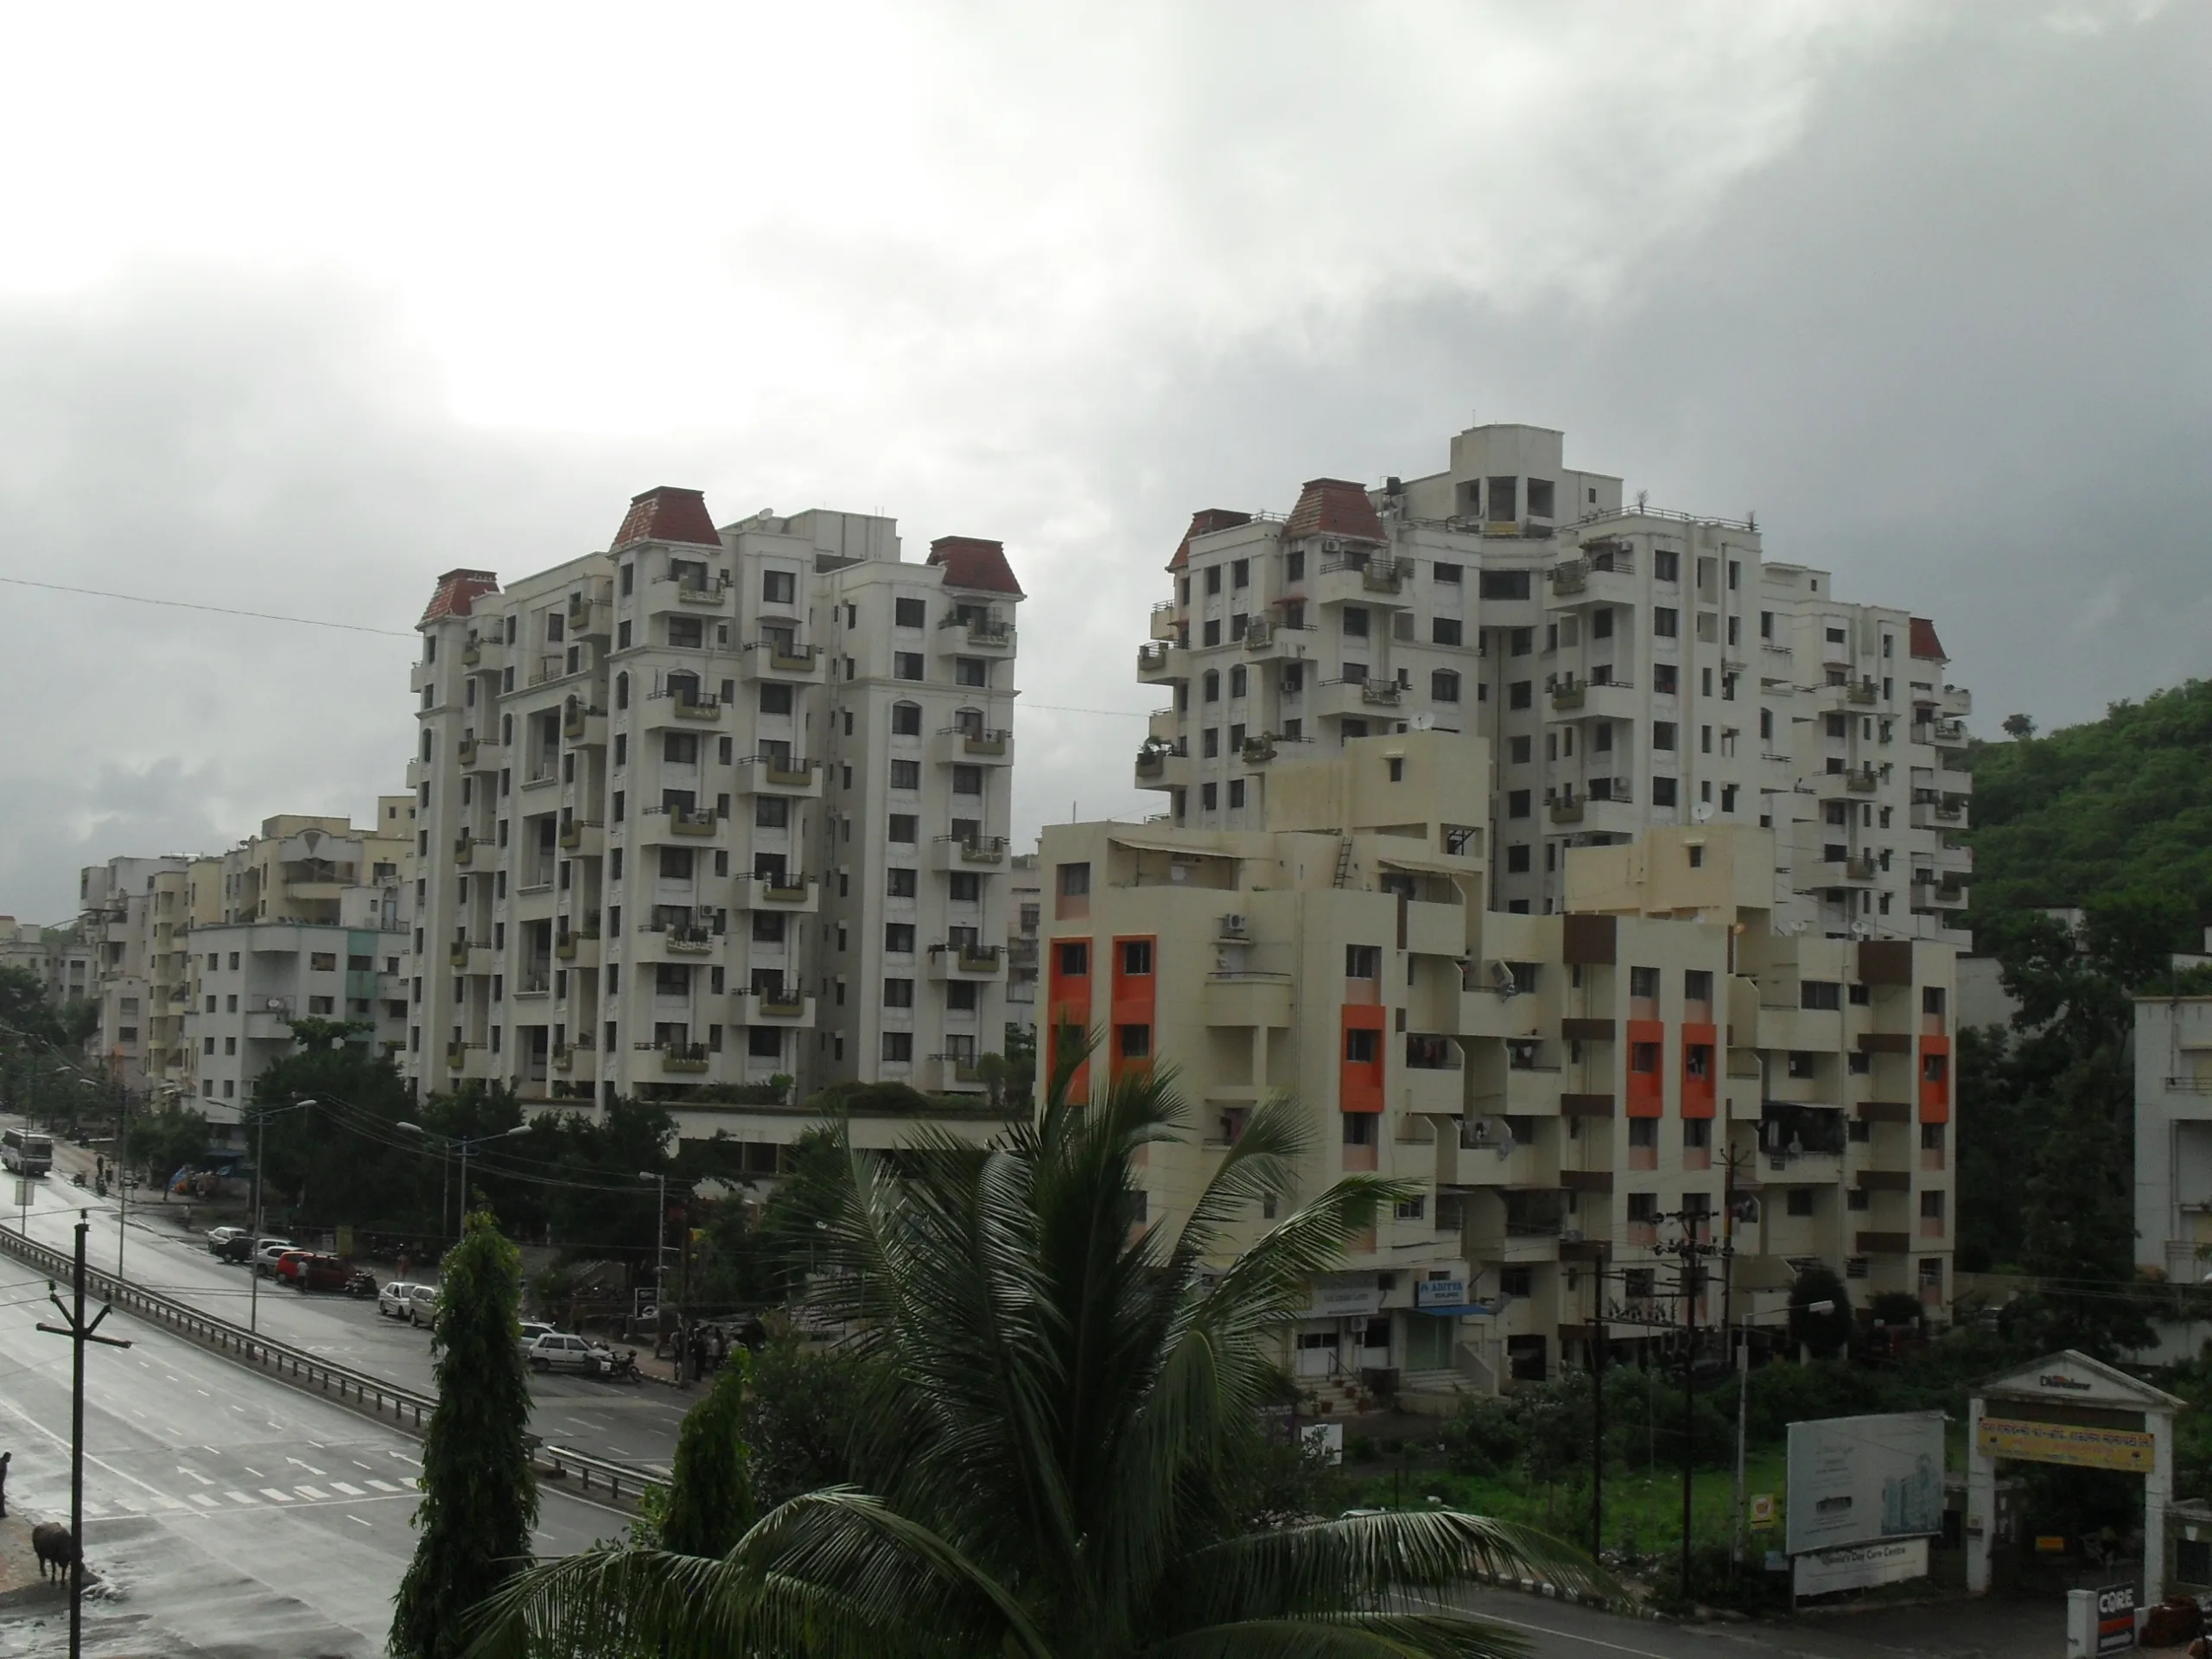 registration-of-properties-in-mumbai-a-festive-surge-by-knight-frank